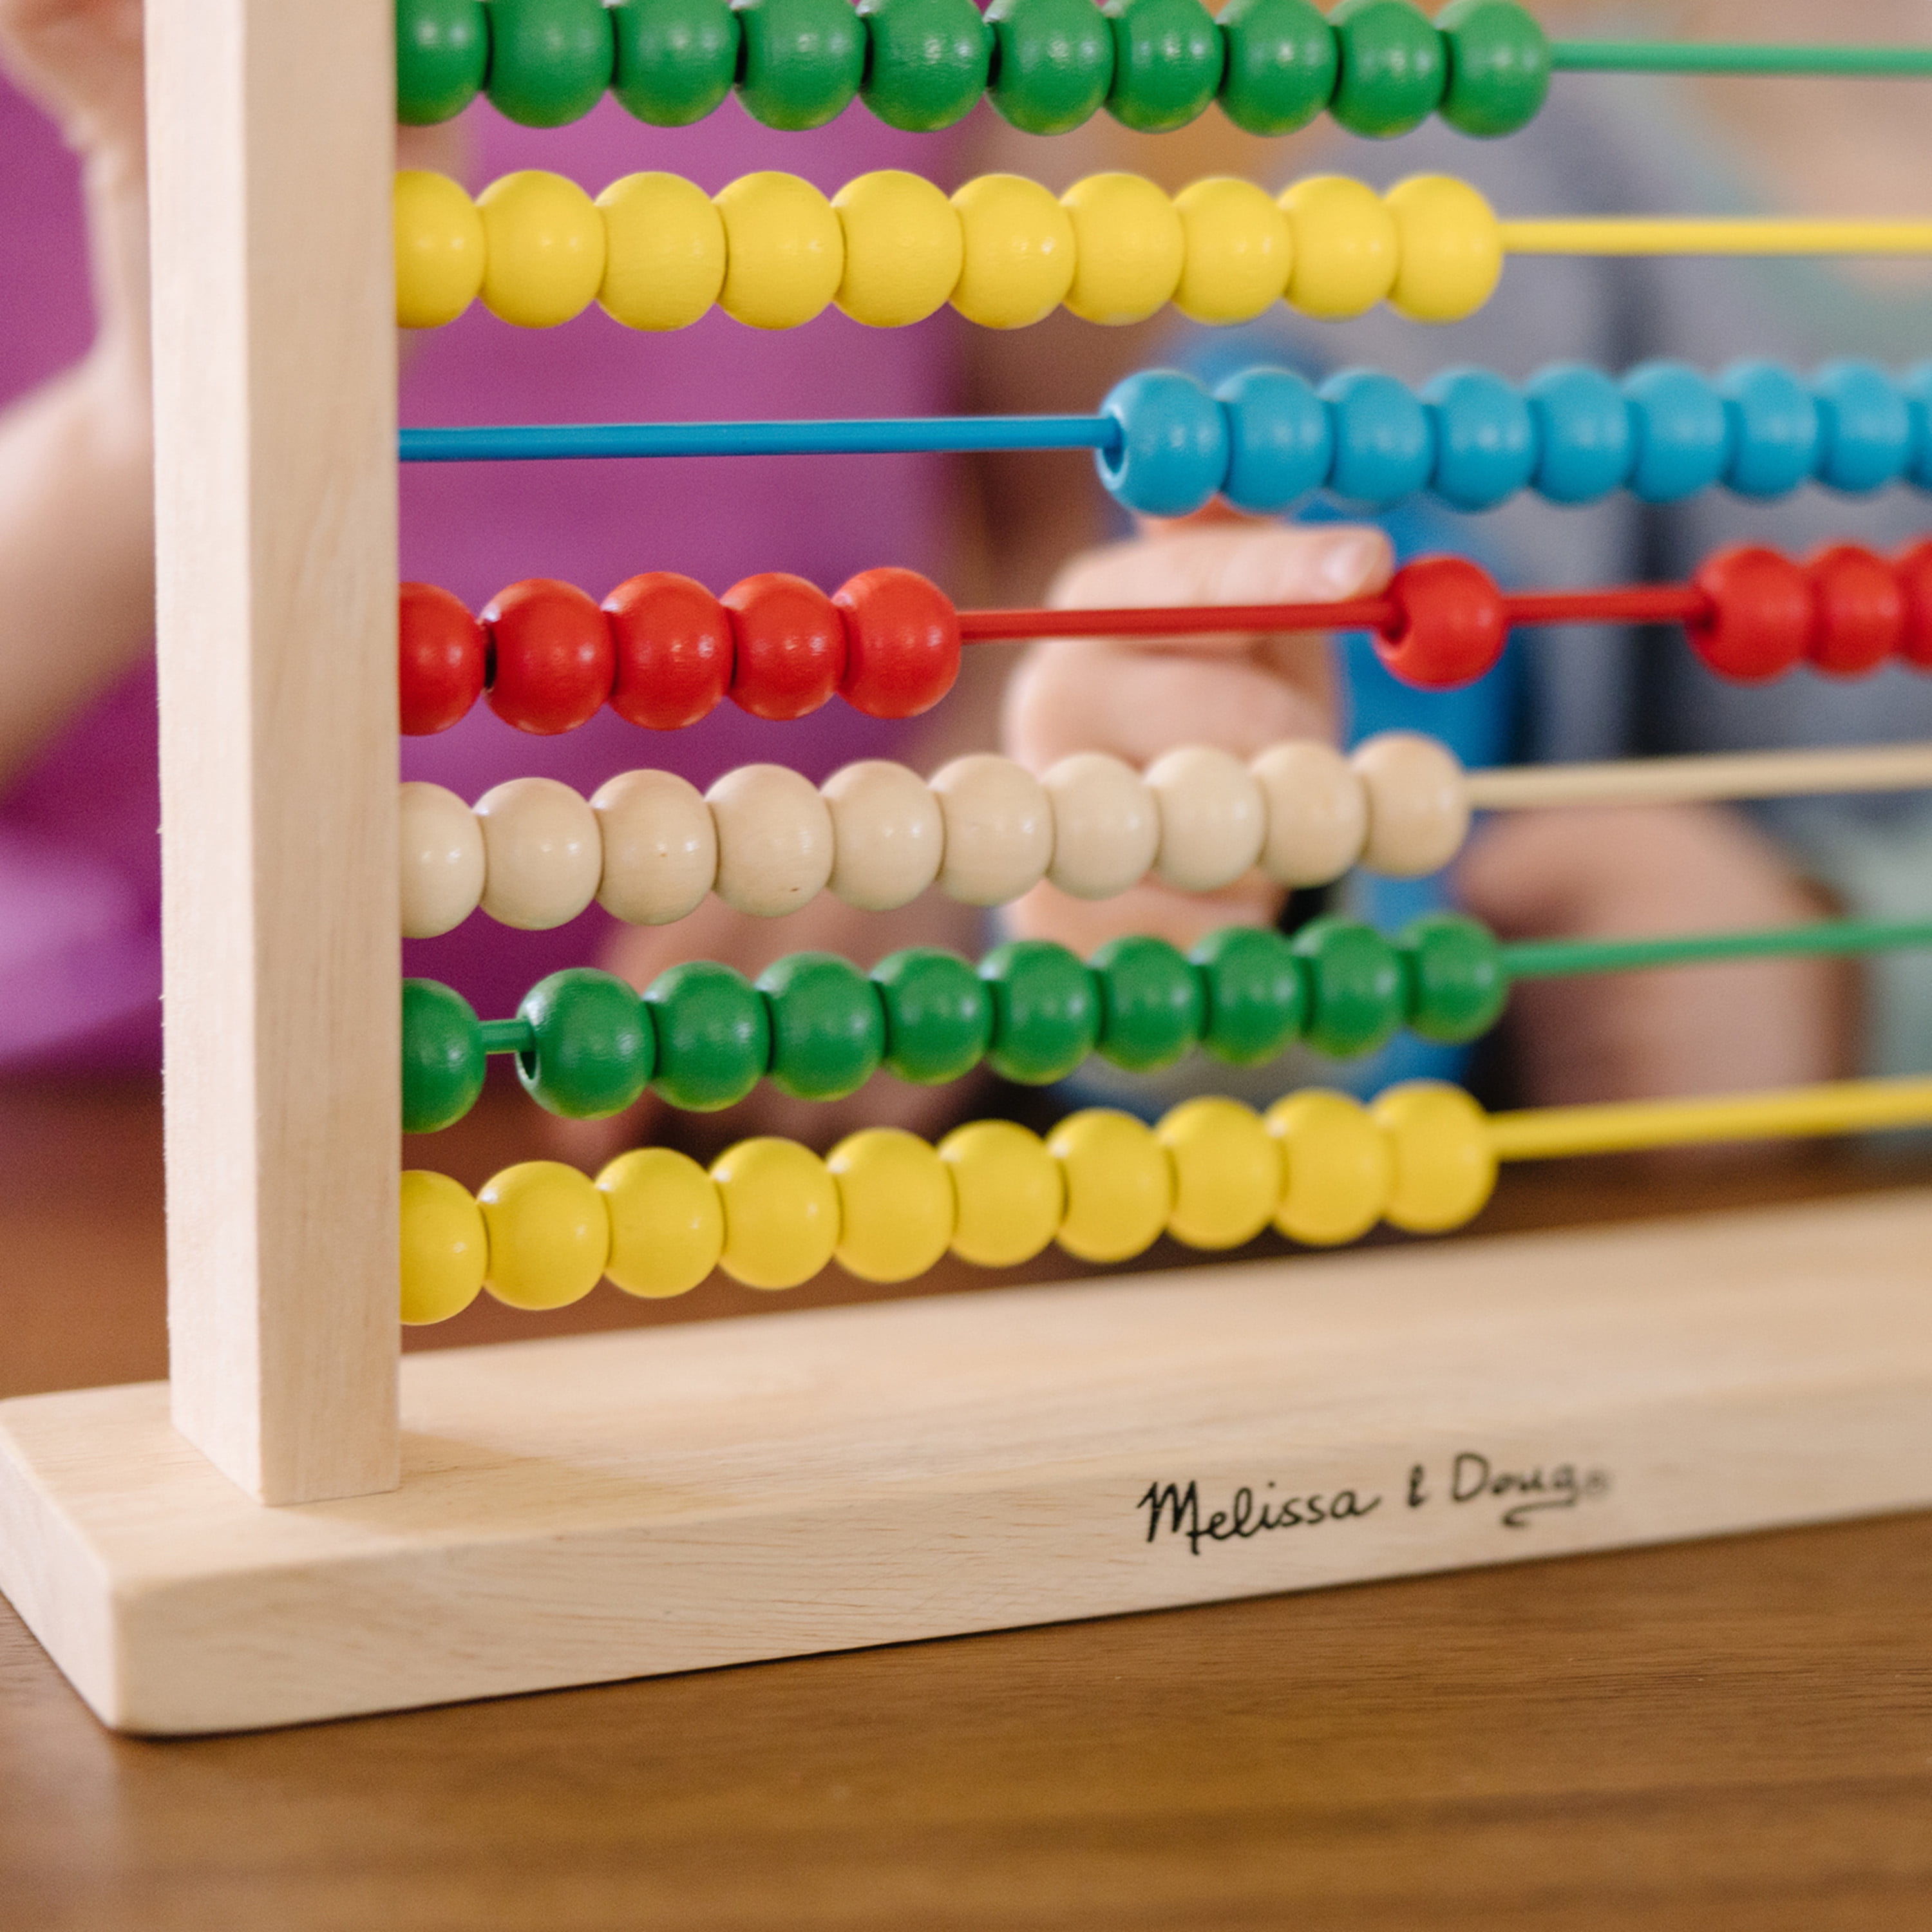 Details about   Wooden Abacus 100 Colorful Beads Counting Kids Math Educational Toy Gift 